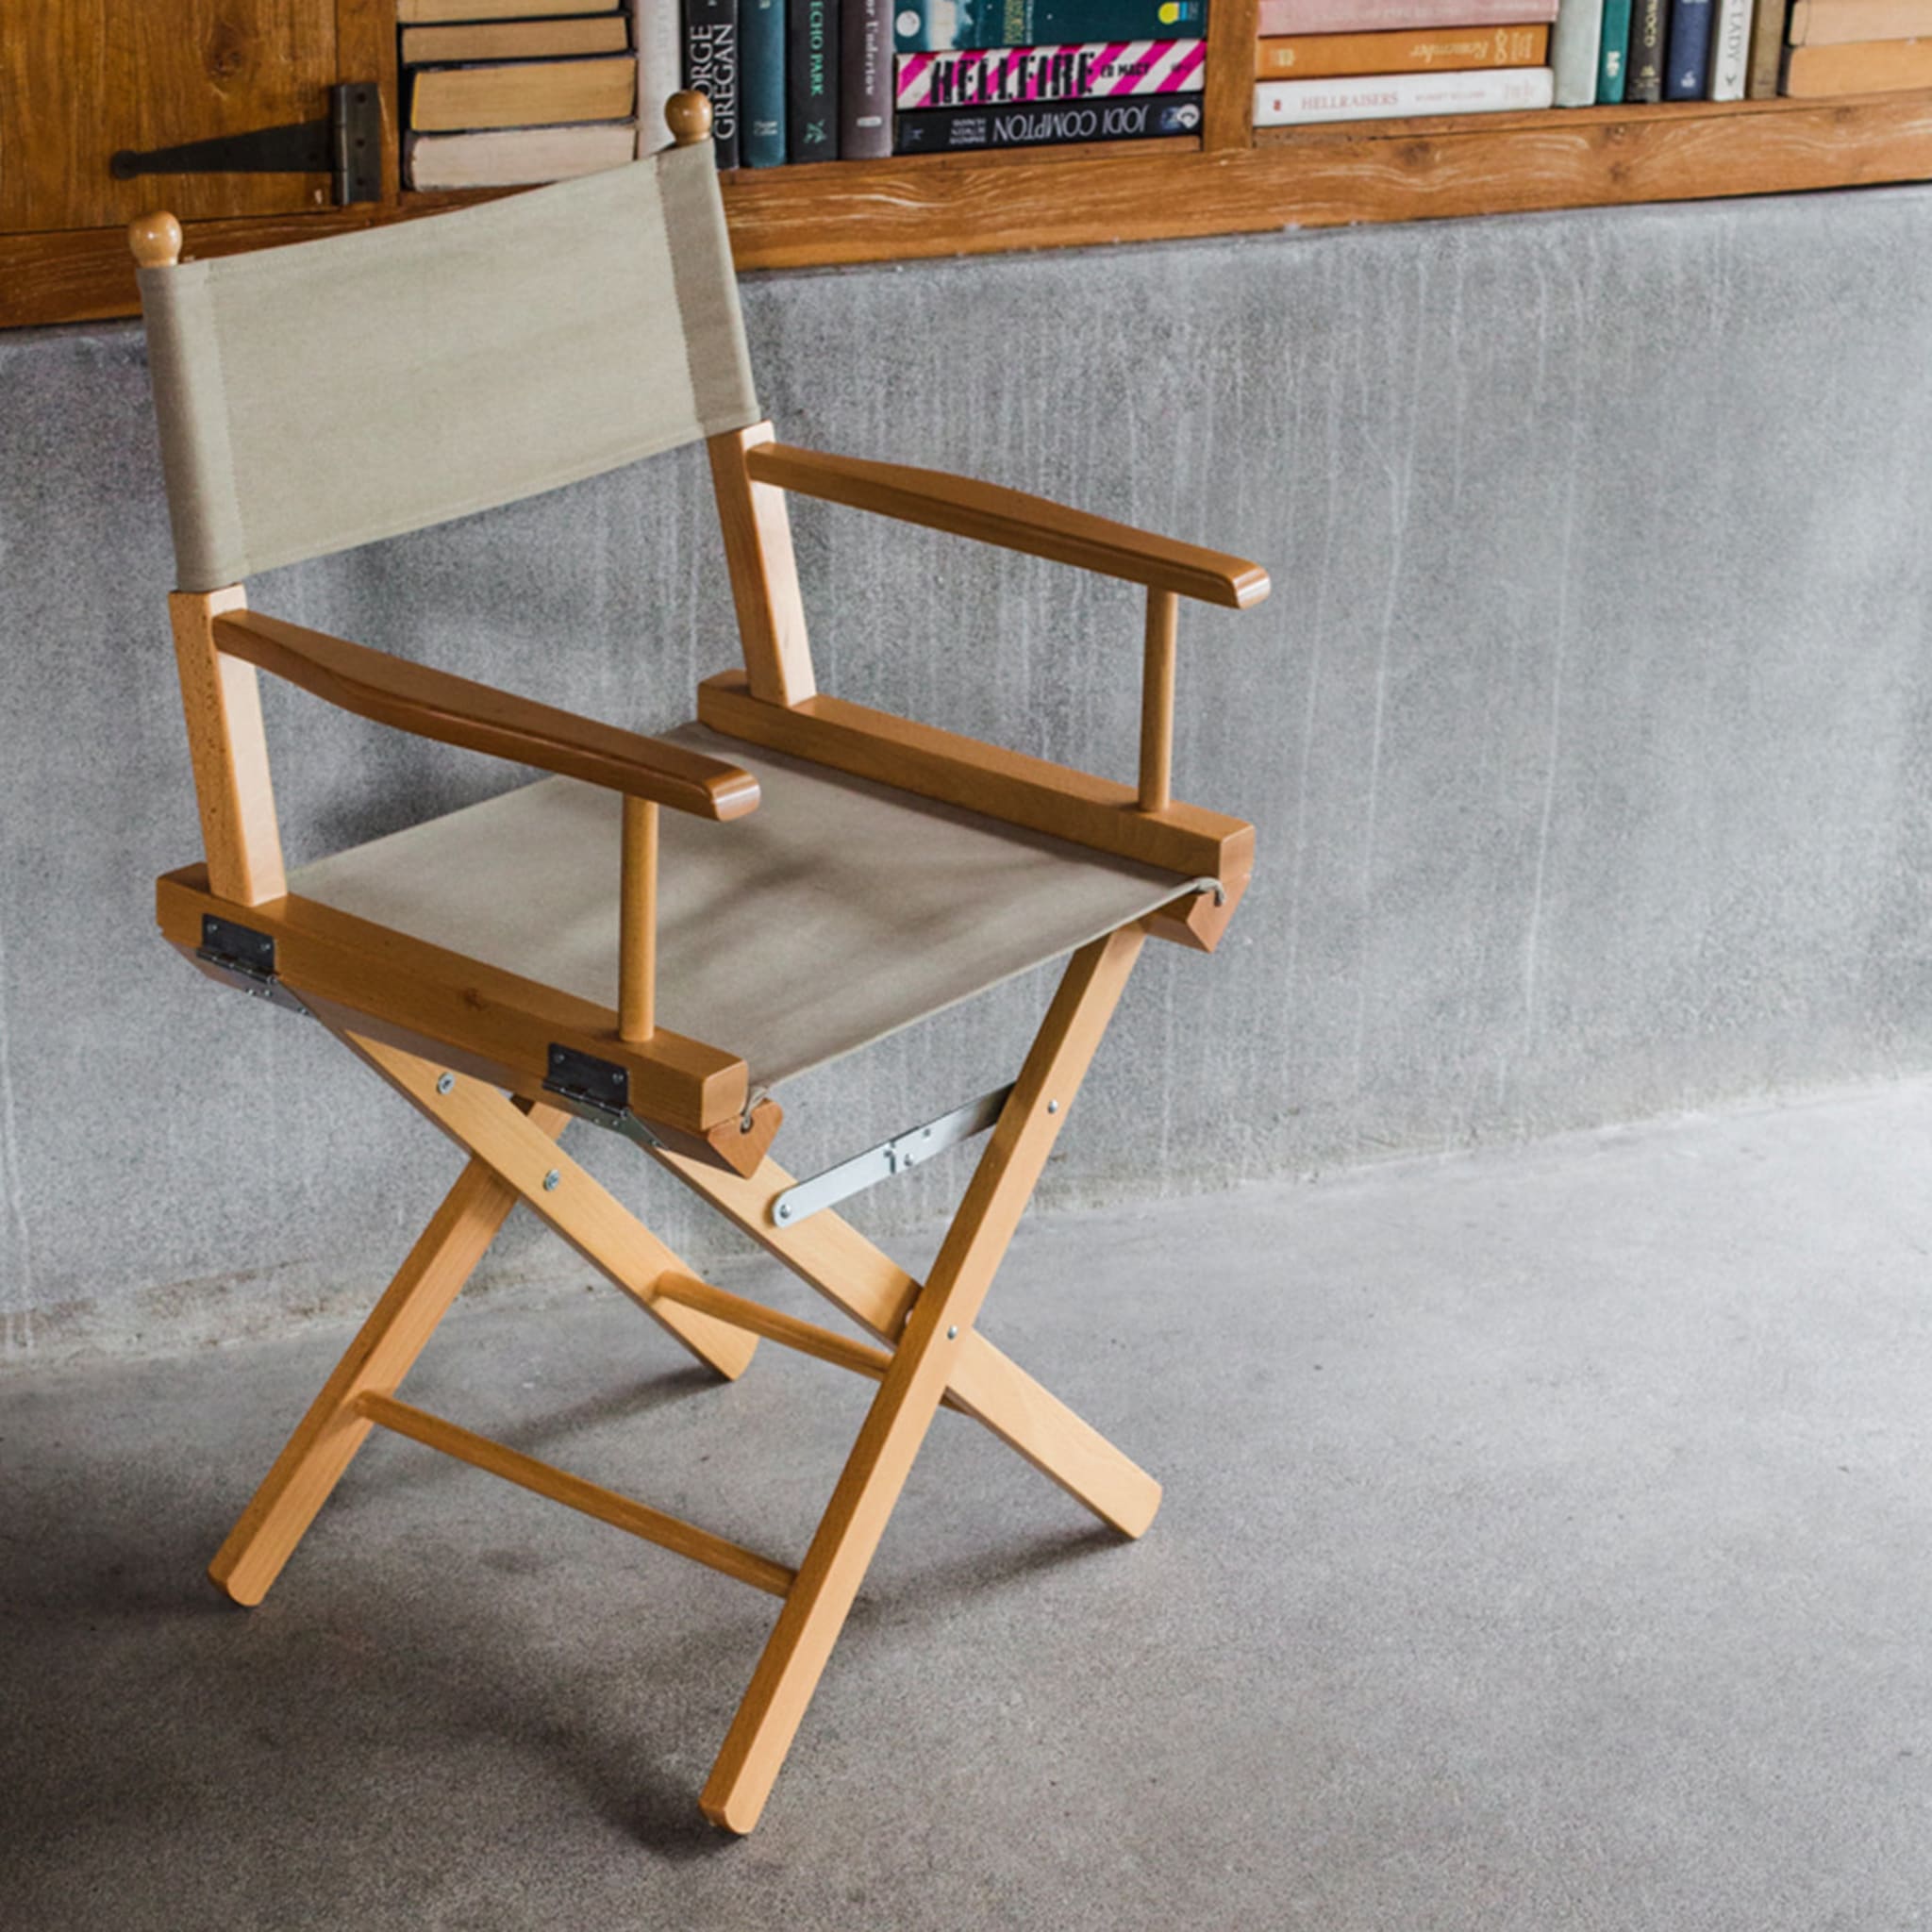 Director's Chair in Camouflage Green - Alternative view 3